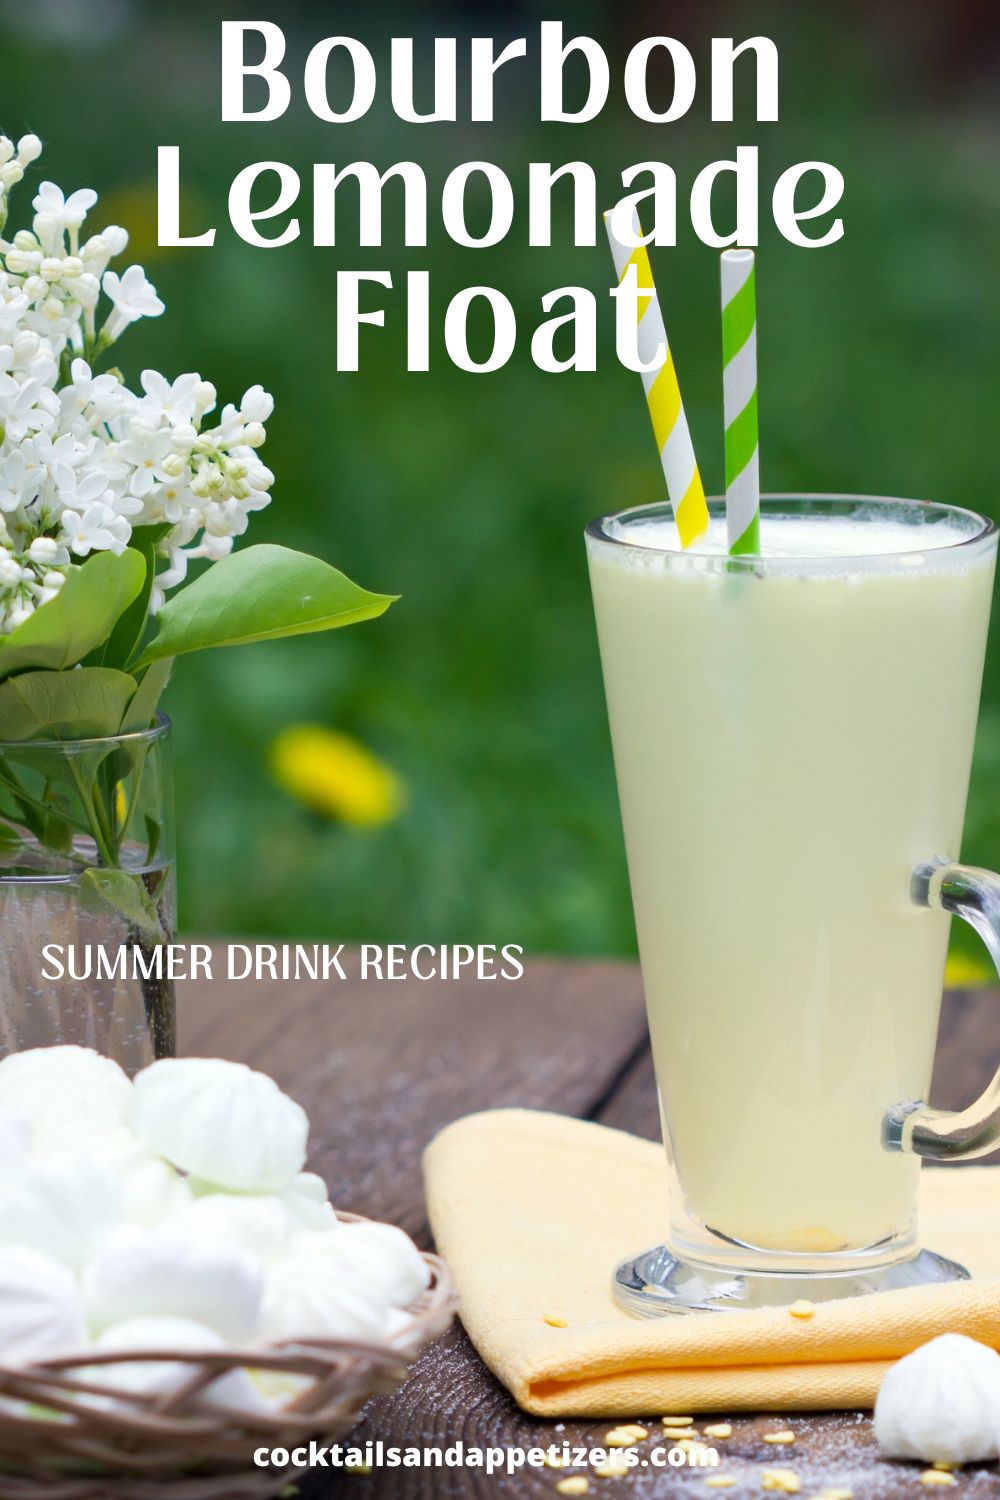 Bourbon Lemonade ice cream float in a tall glass with straws, sitting on a wood table outside.